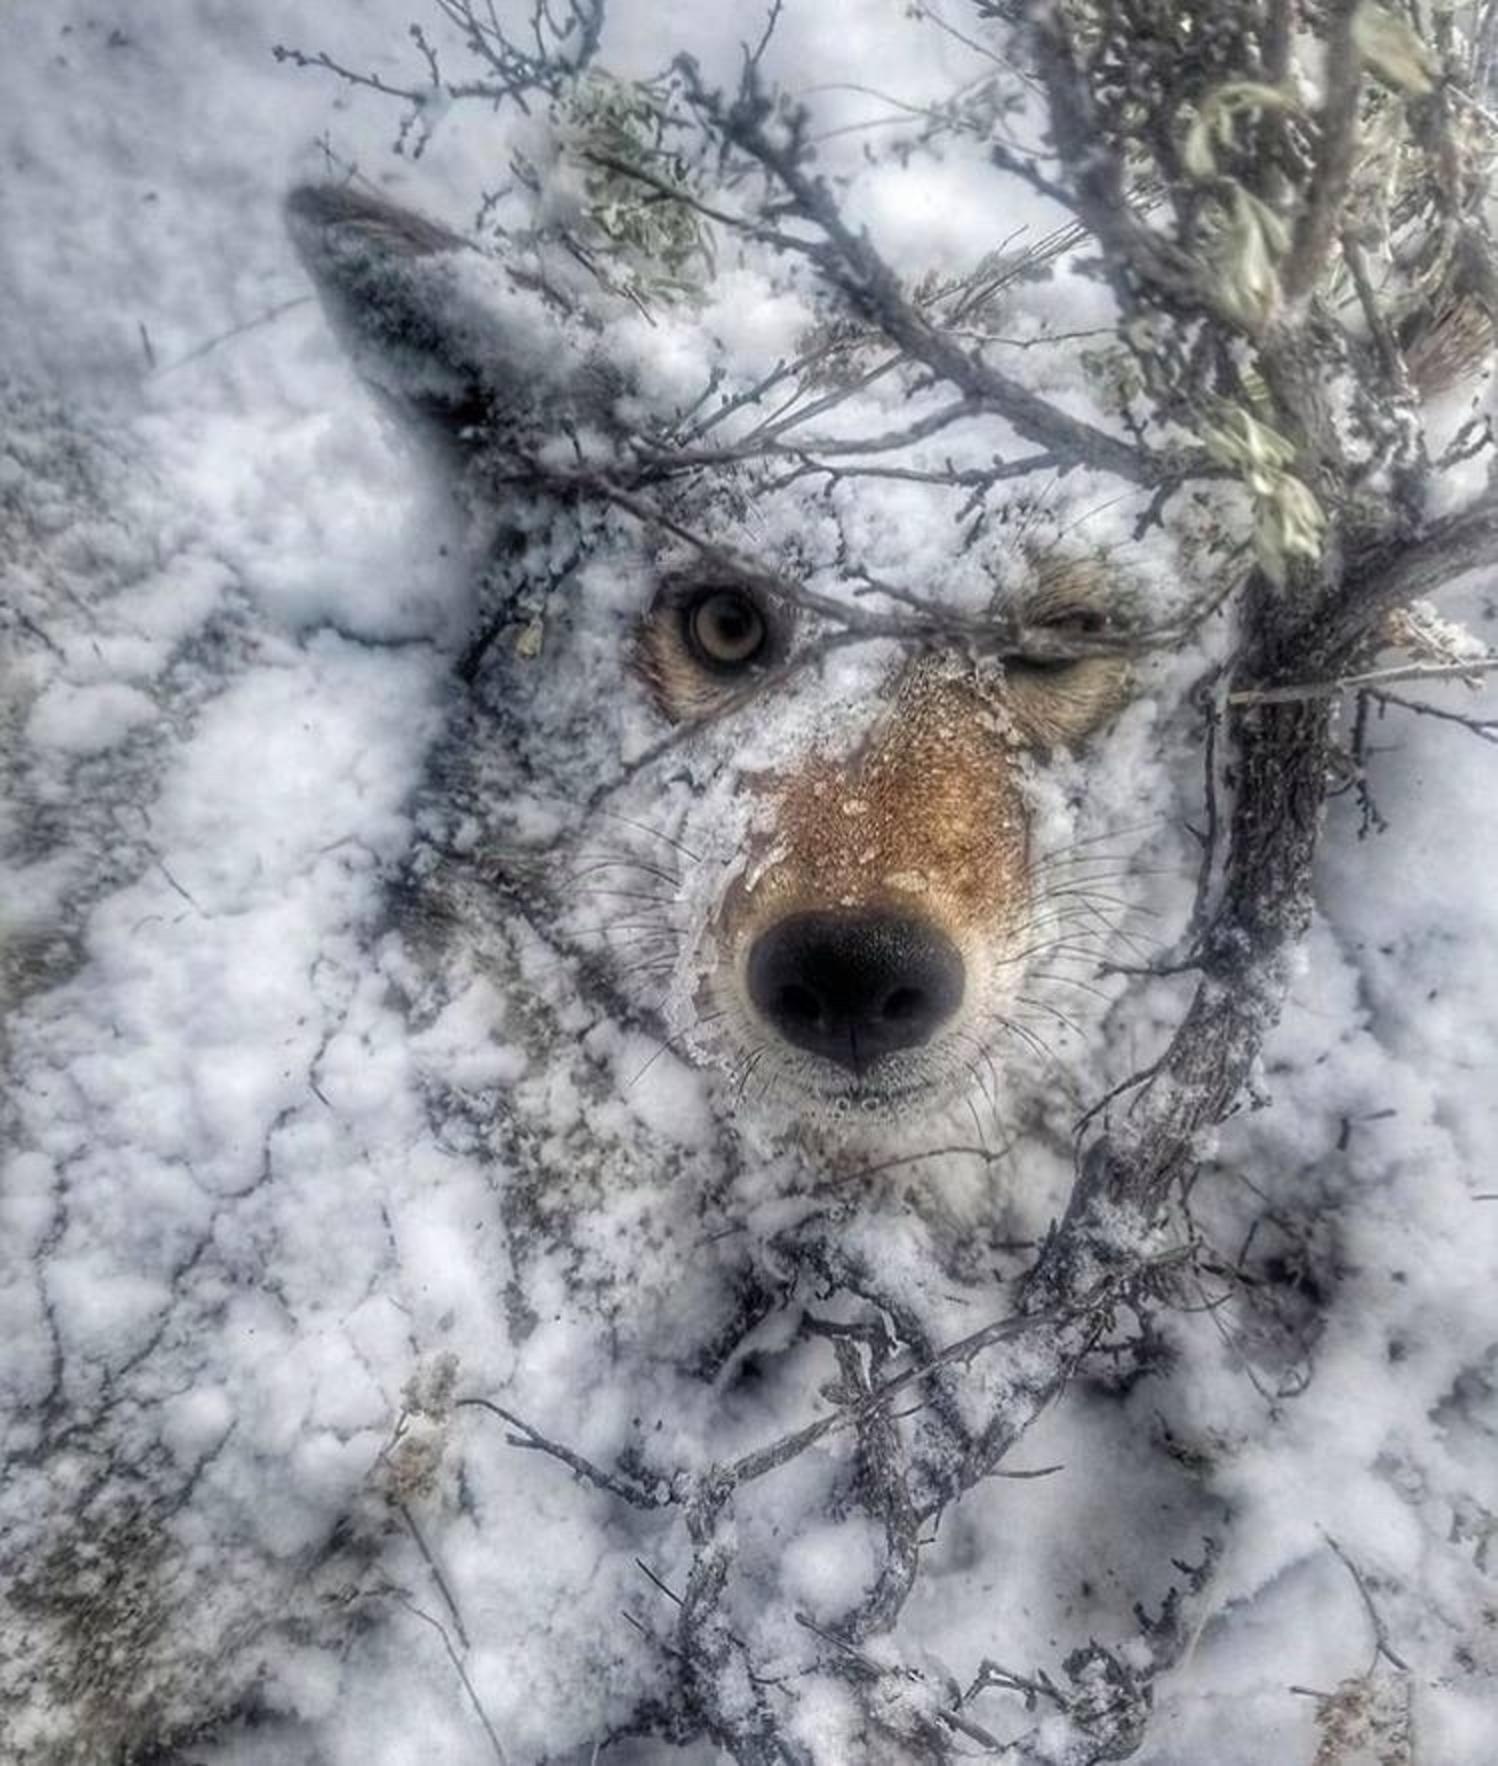 Last view of a doomed coyote:  This photograph of a crushed coyote, run over and killed by a Wyoming snowmobiler, was circulated on social media to tout the spoils of a successful hunt.  Photo: #chasin_fur on Instagram